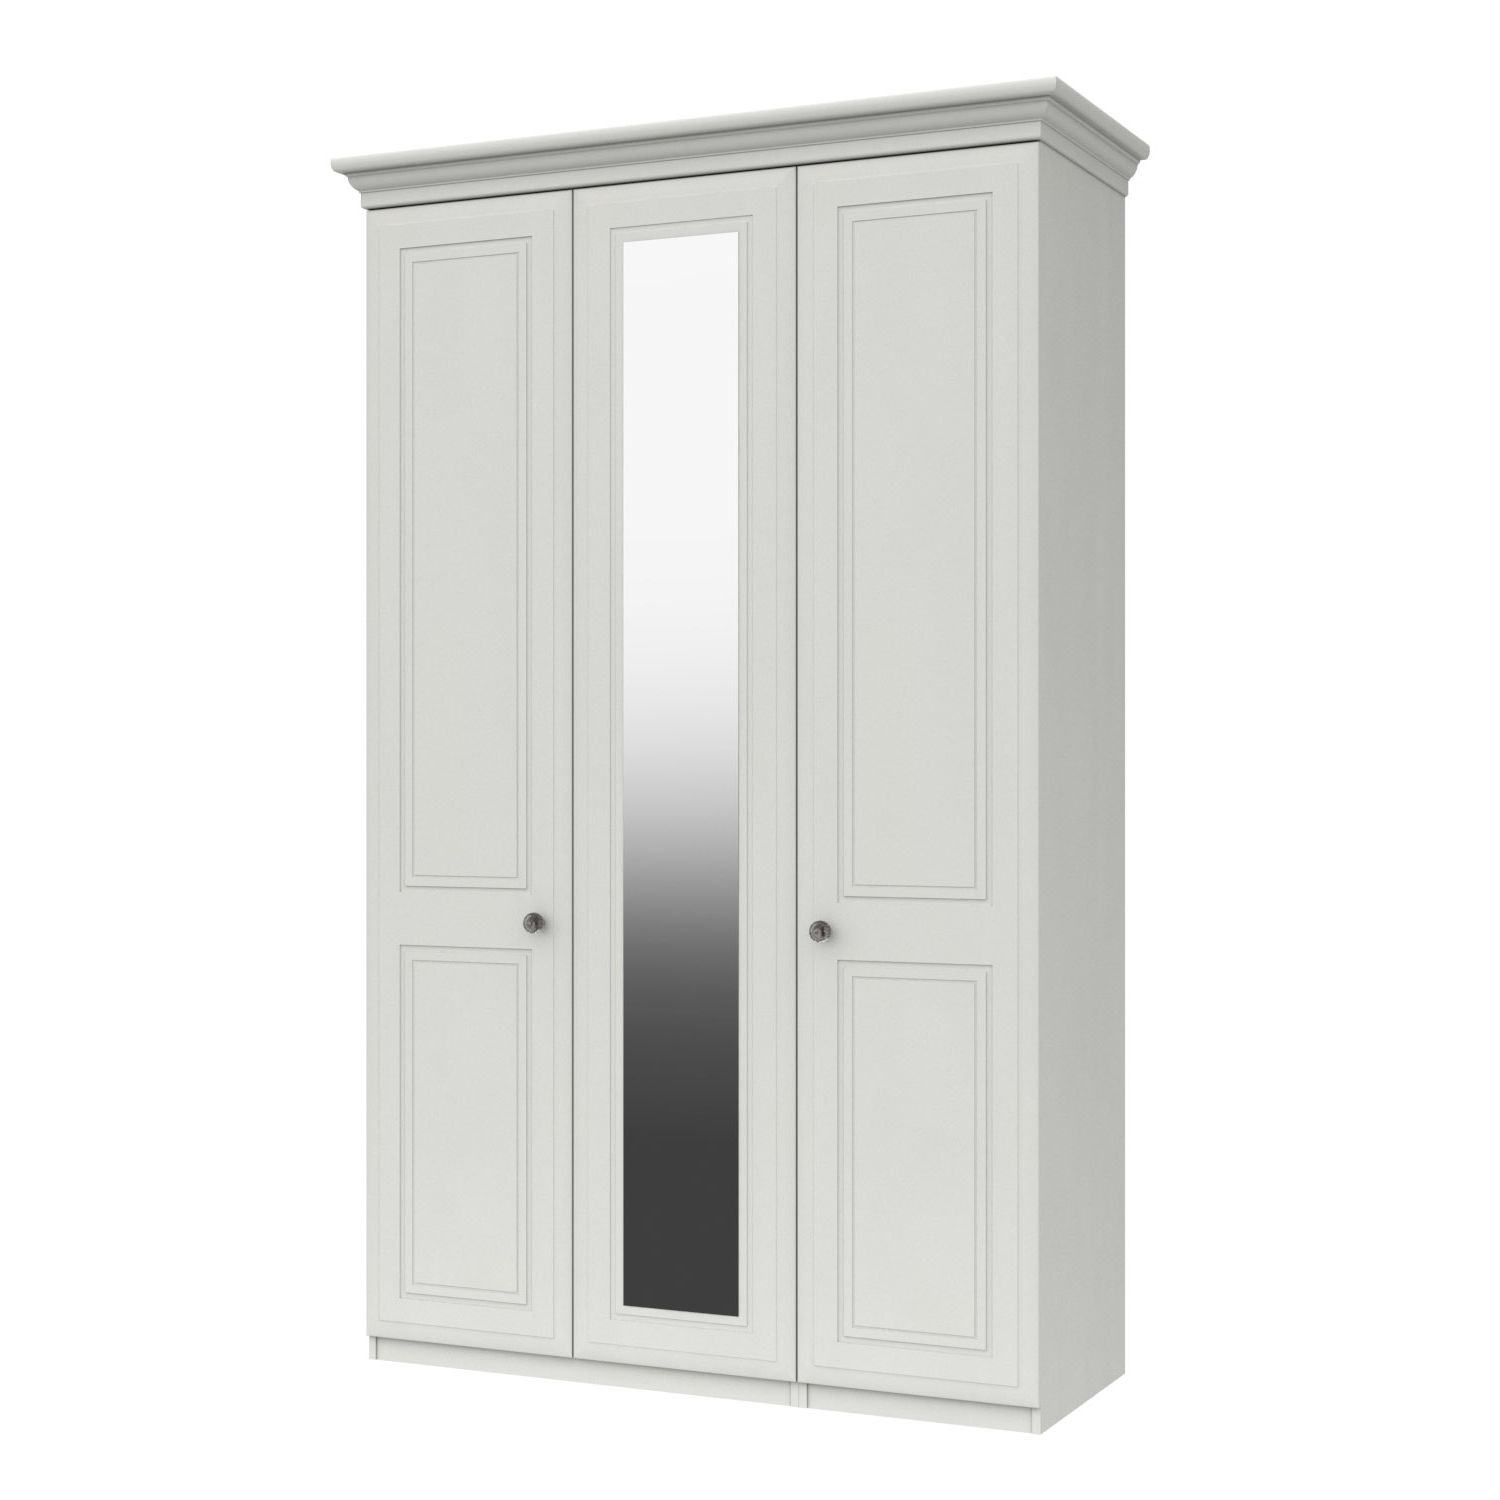 Tall 3 Door Wardrobe With Mirror – Tr Hayes Furniture Bath Pertaining To White 3 Door Mirrored Wardrobes (View 11 of 20)